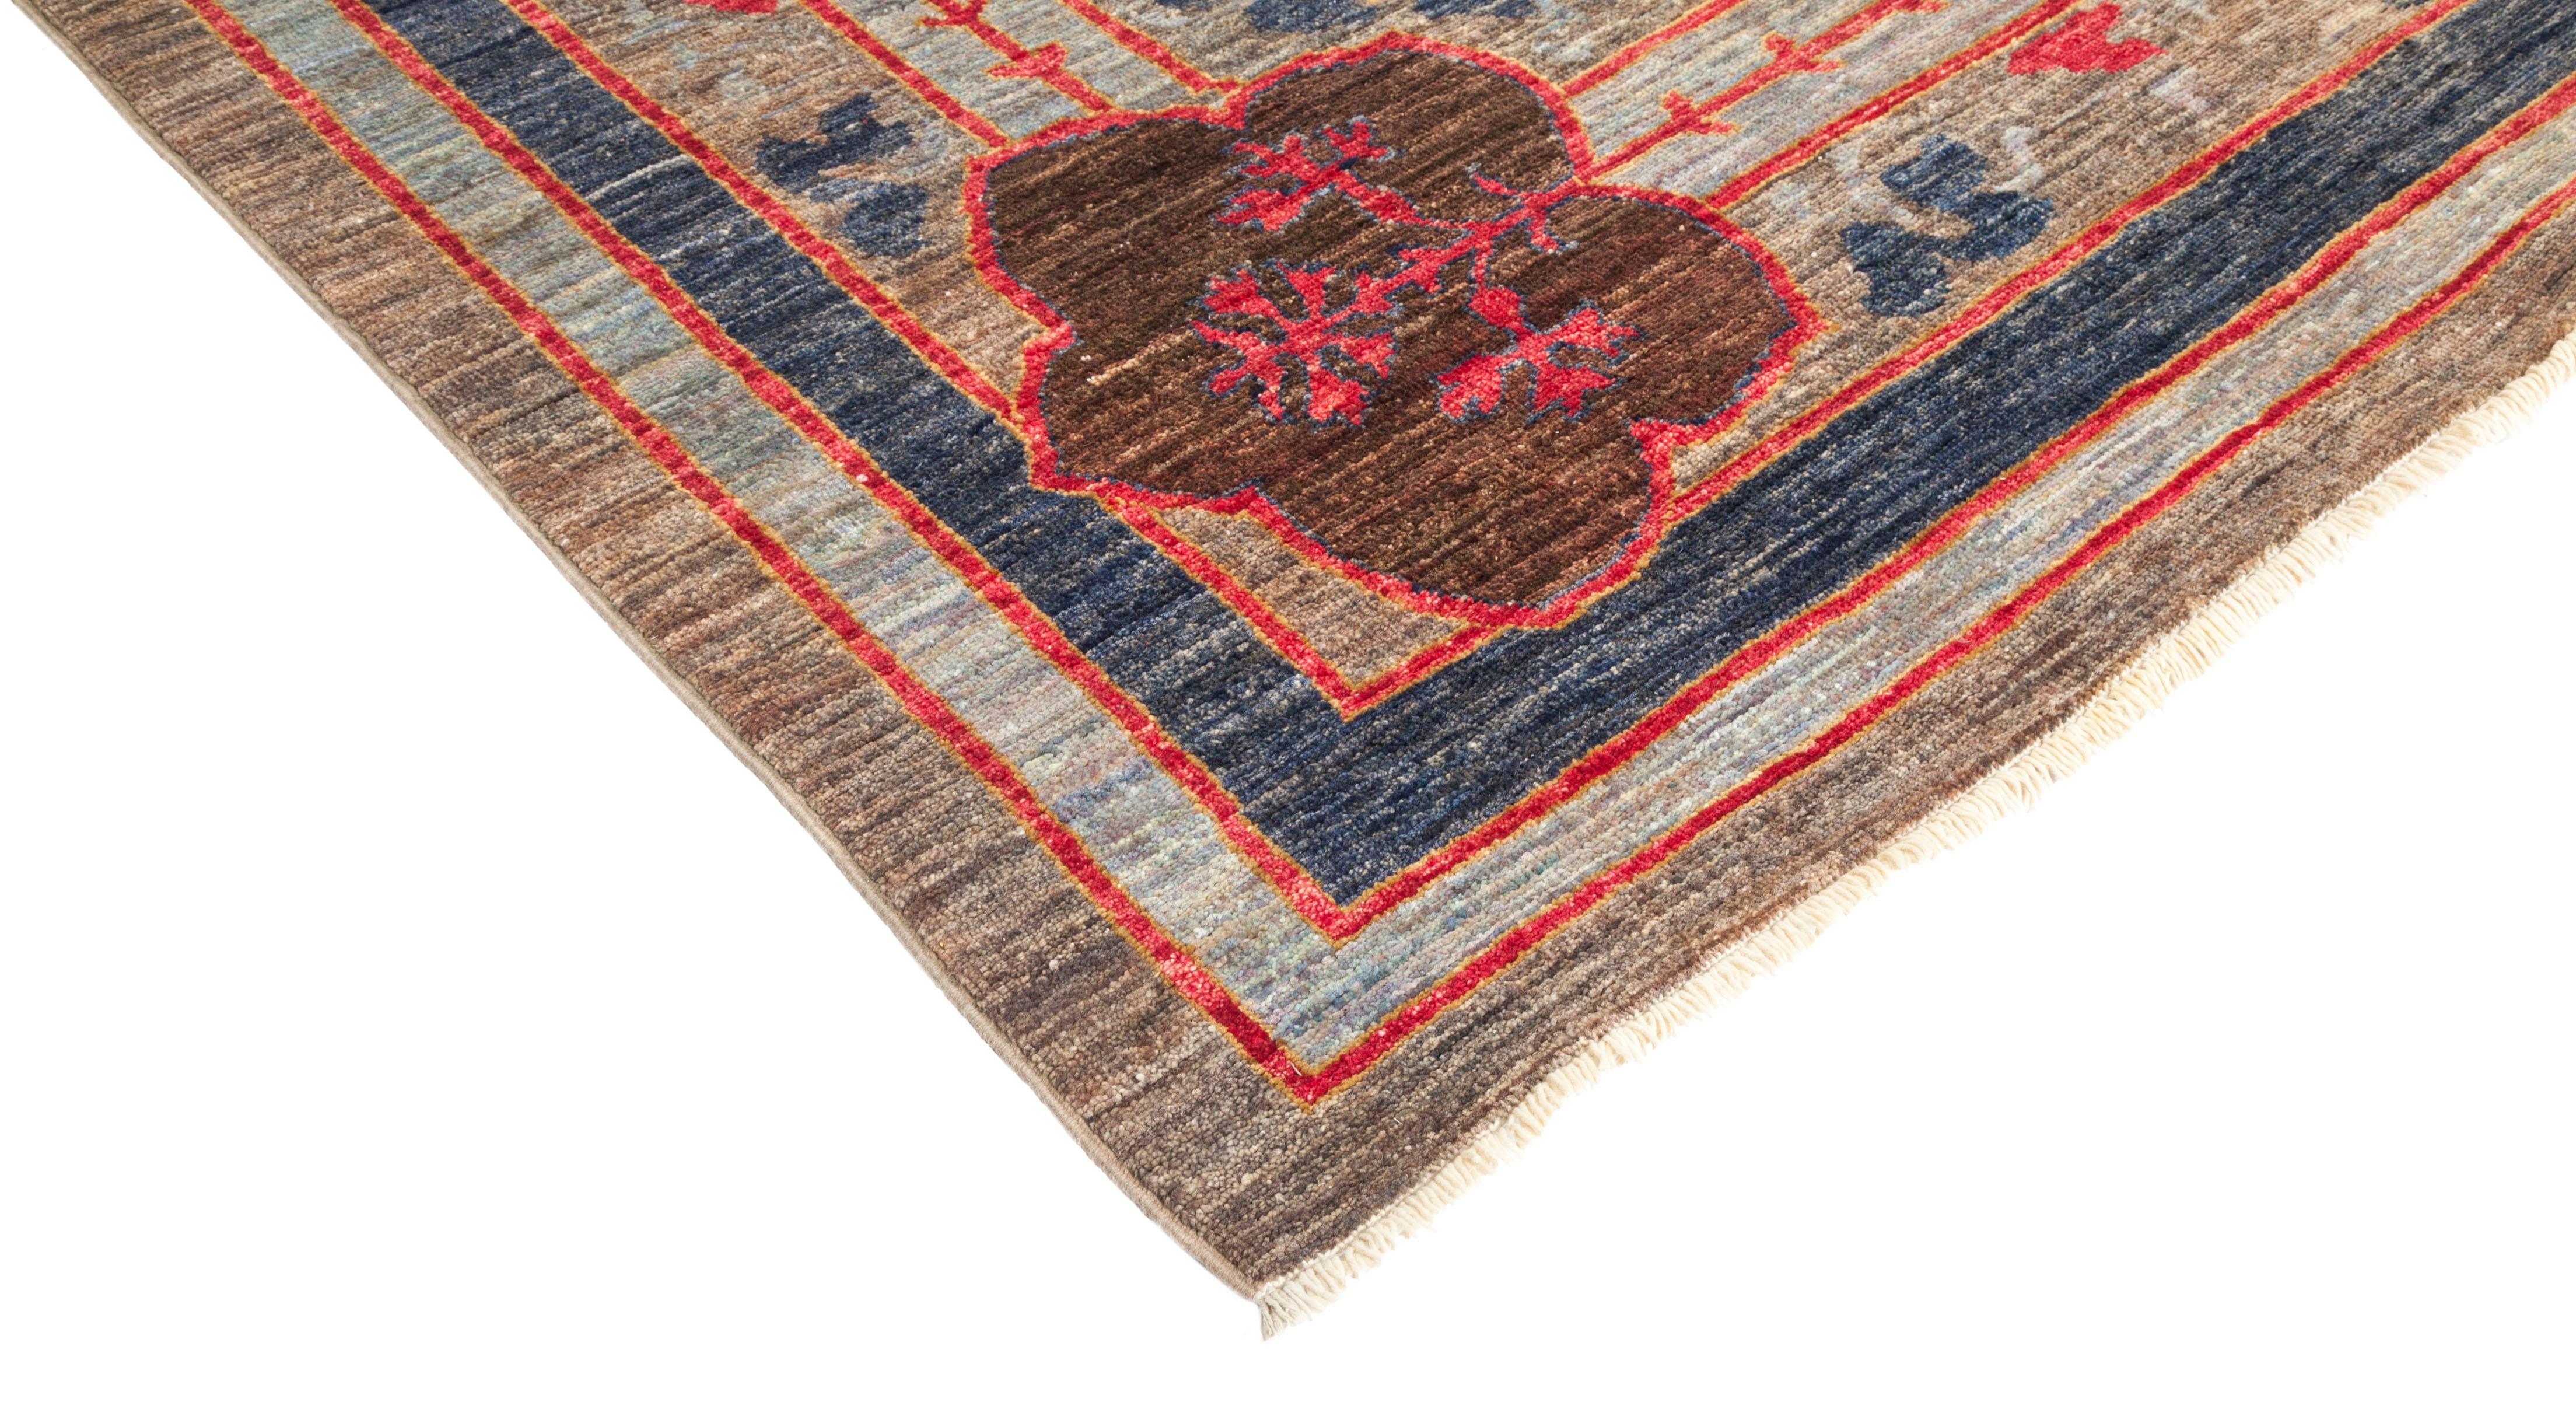 Color: Brown, made in Pakistan. 100% wool. Whether boasting a field of flowers or ancient tribal symbols, patterned rugs are the easiest way to enrich a space. Subtle colors and intricate motifs reinforce the quiet sophistication of a traditional